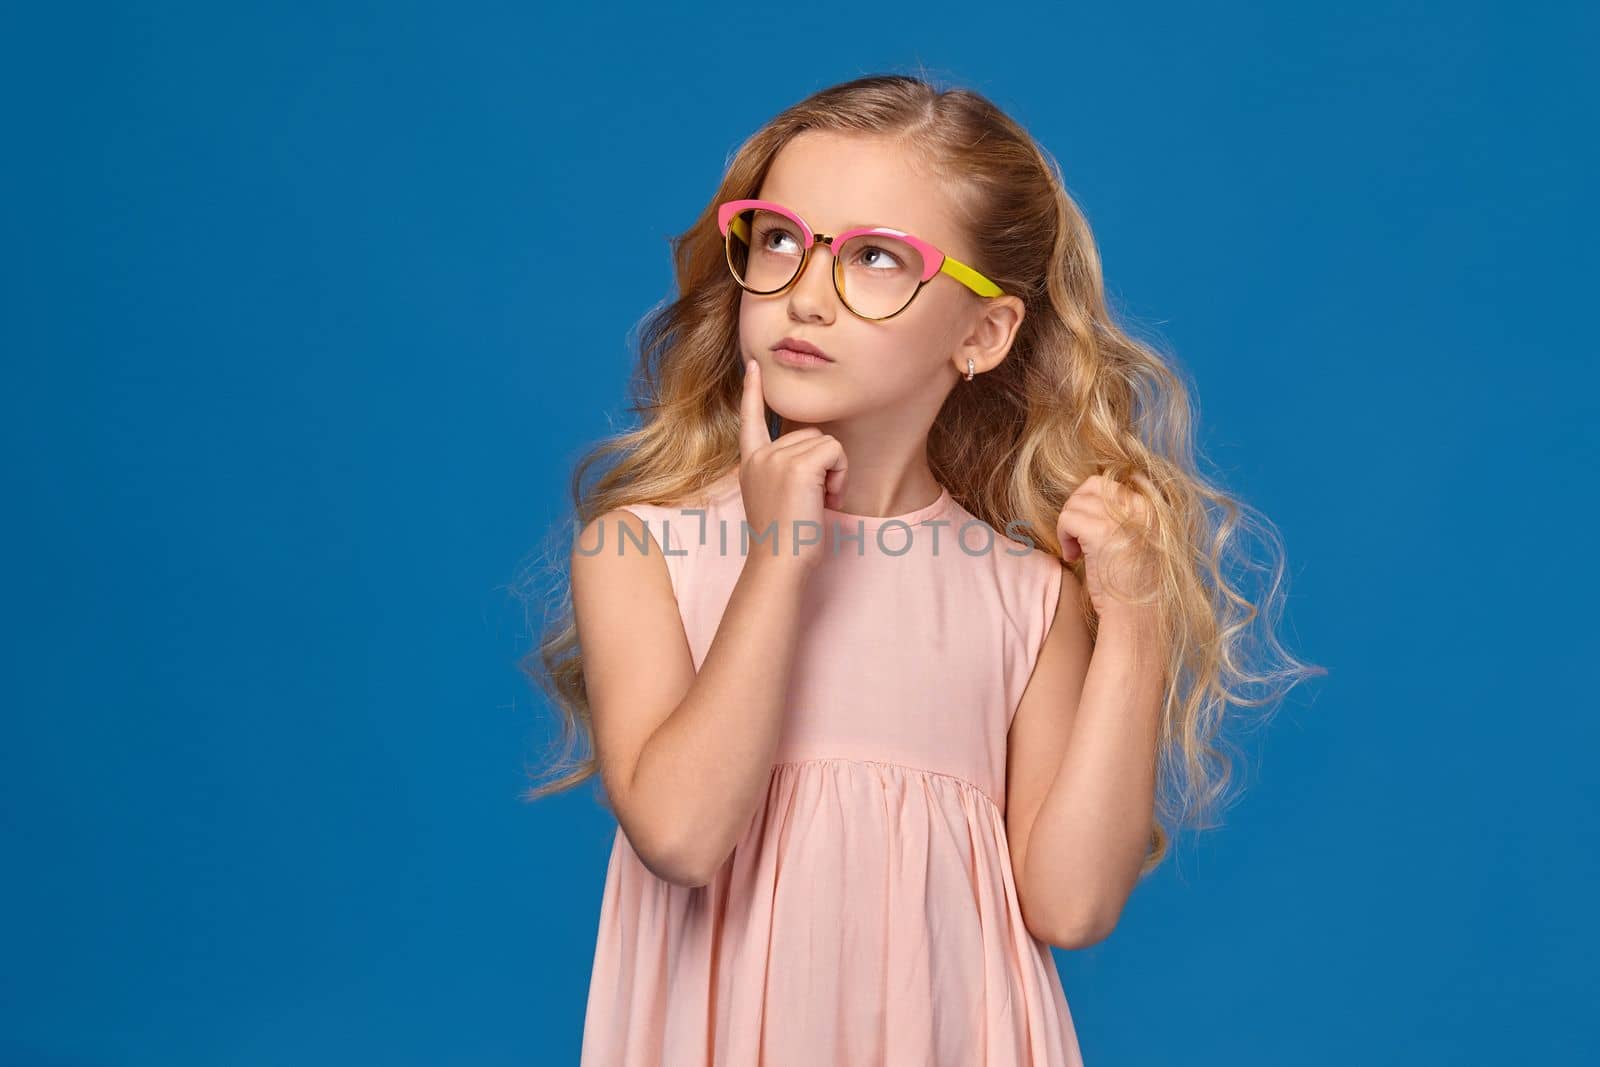 Beautiful little girl in a pink dress and a fashionable glasses is looking up thoughtfully, standing on a blue background.